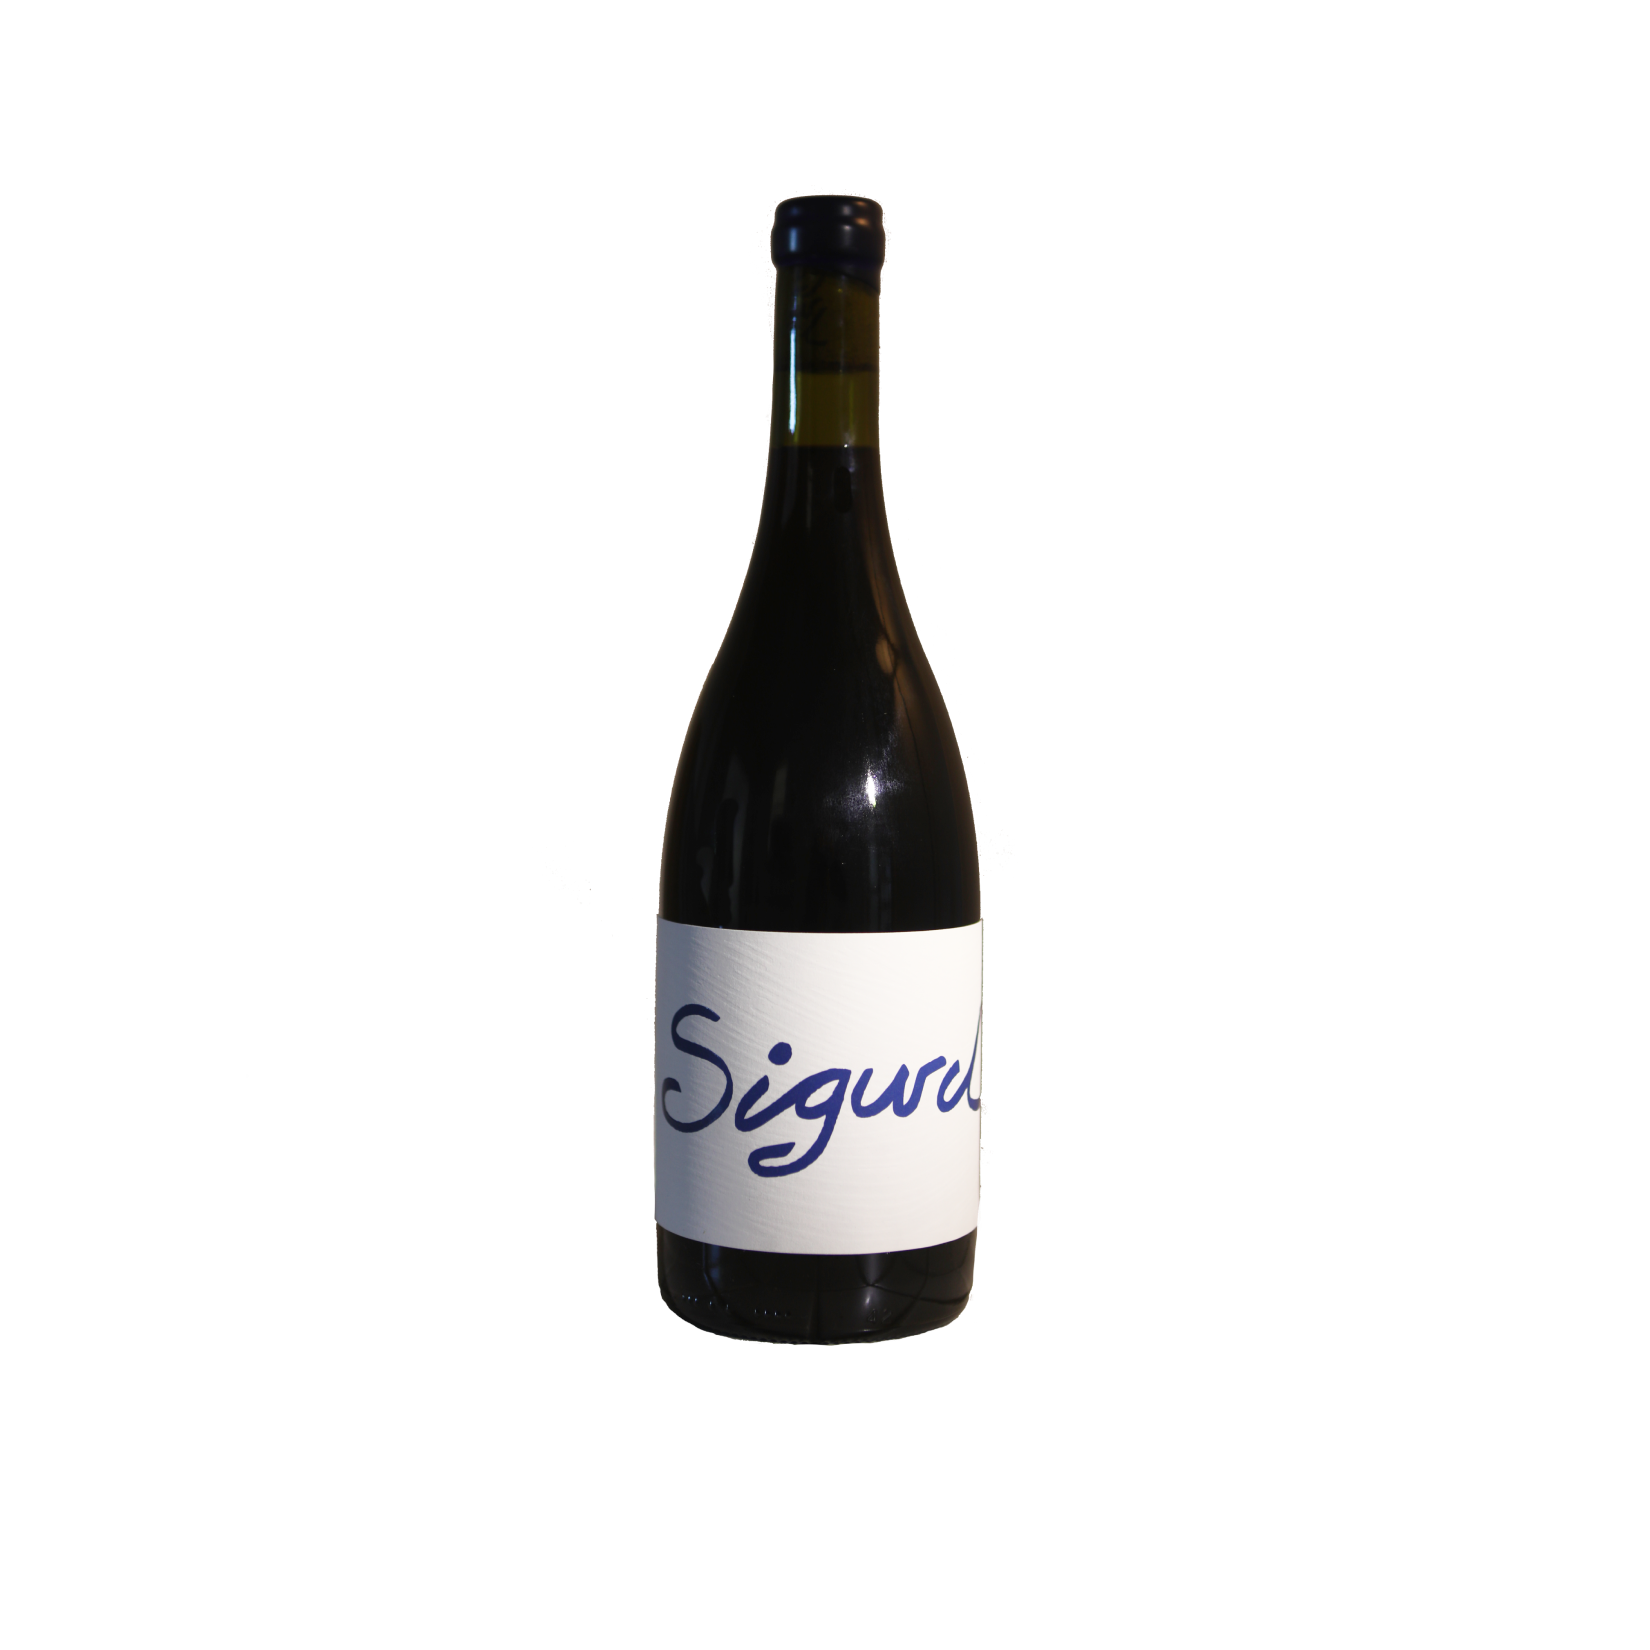 2021 Carignan - SOLD OUT